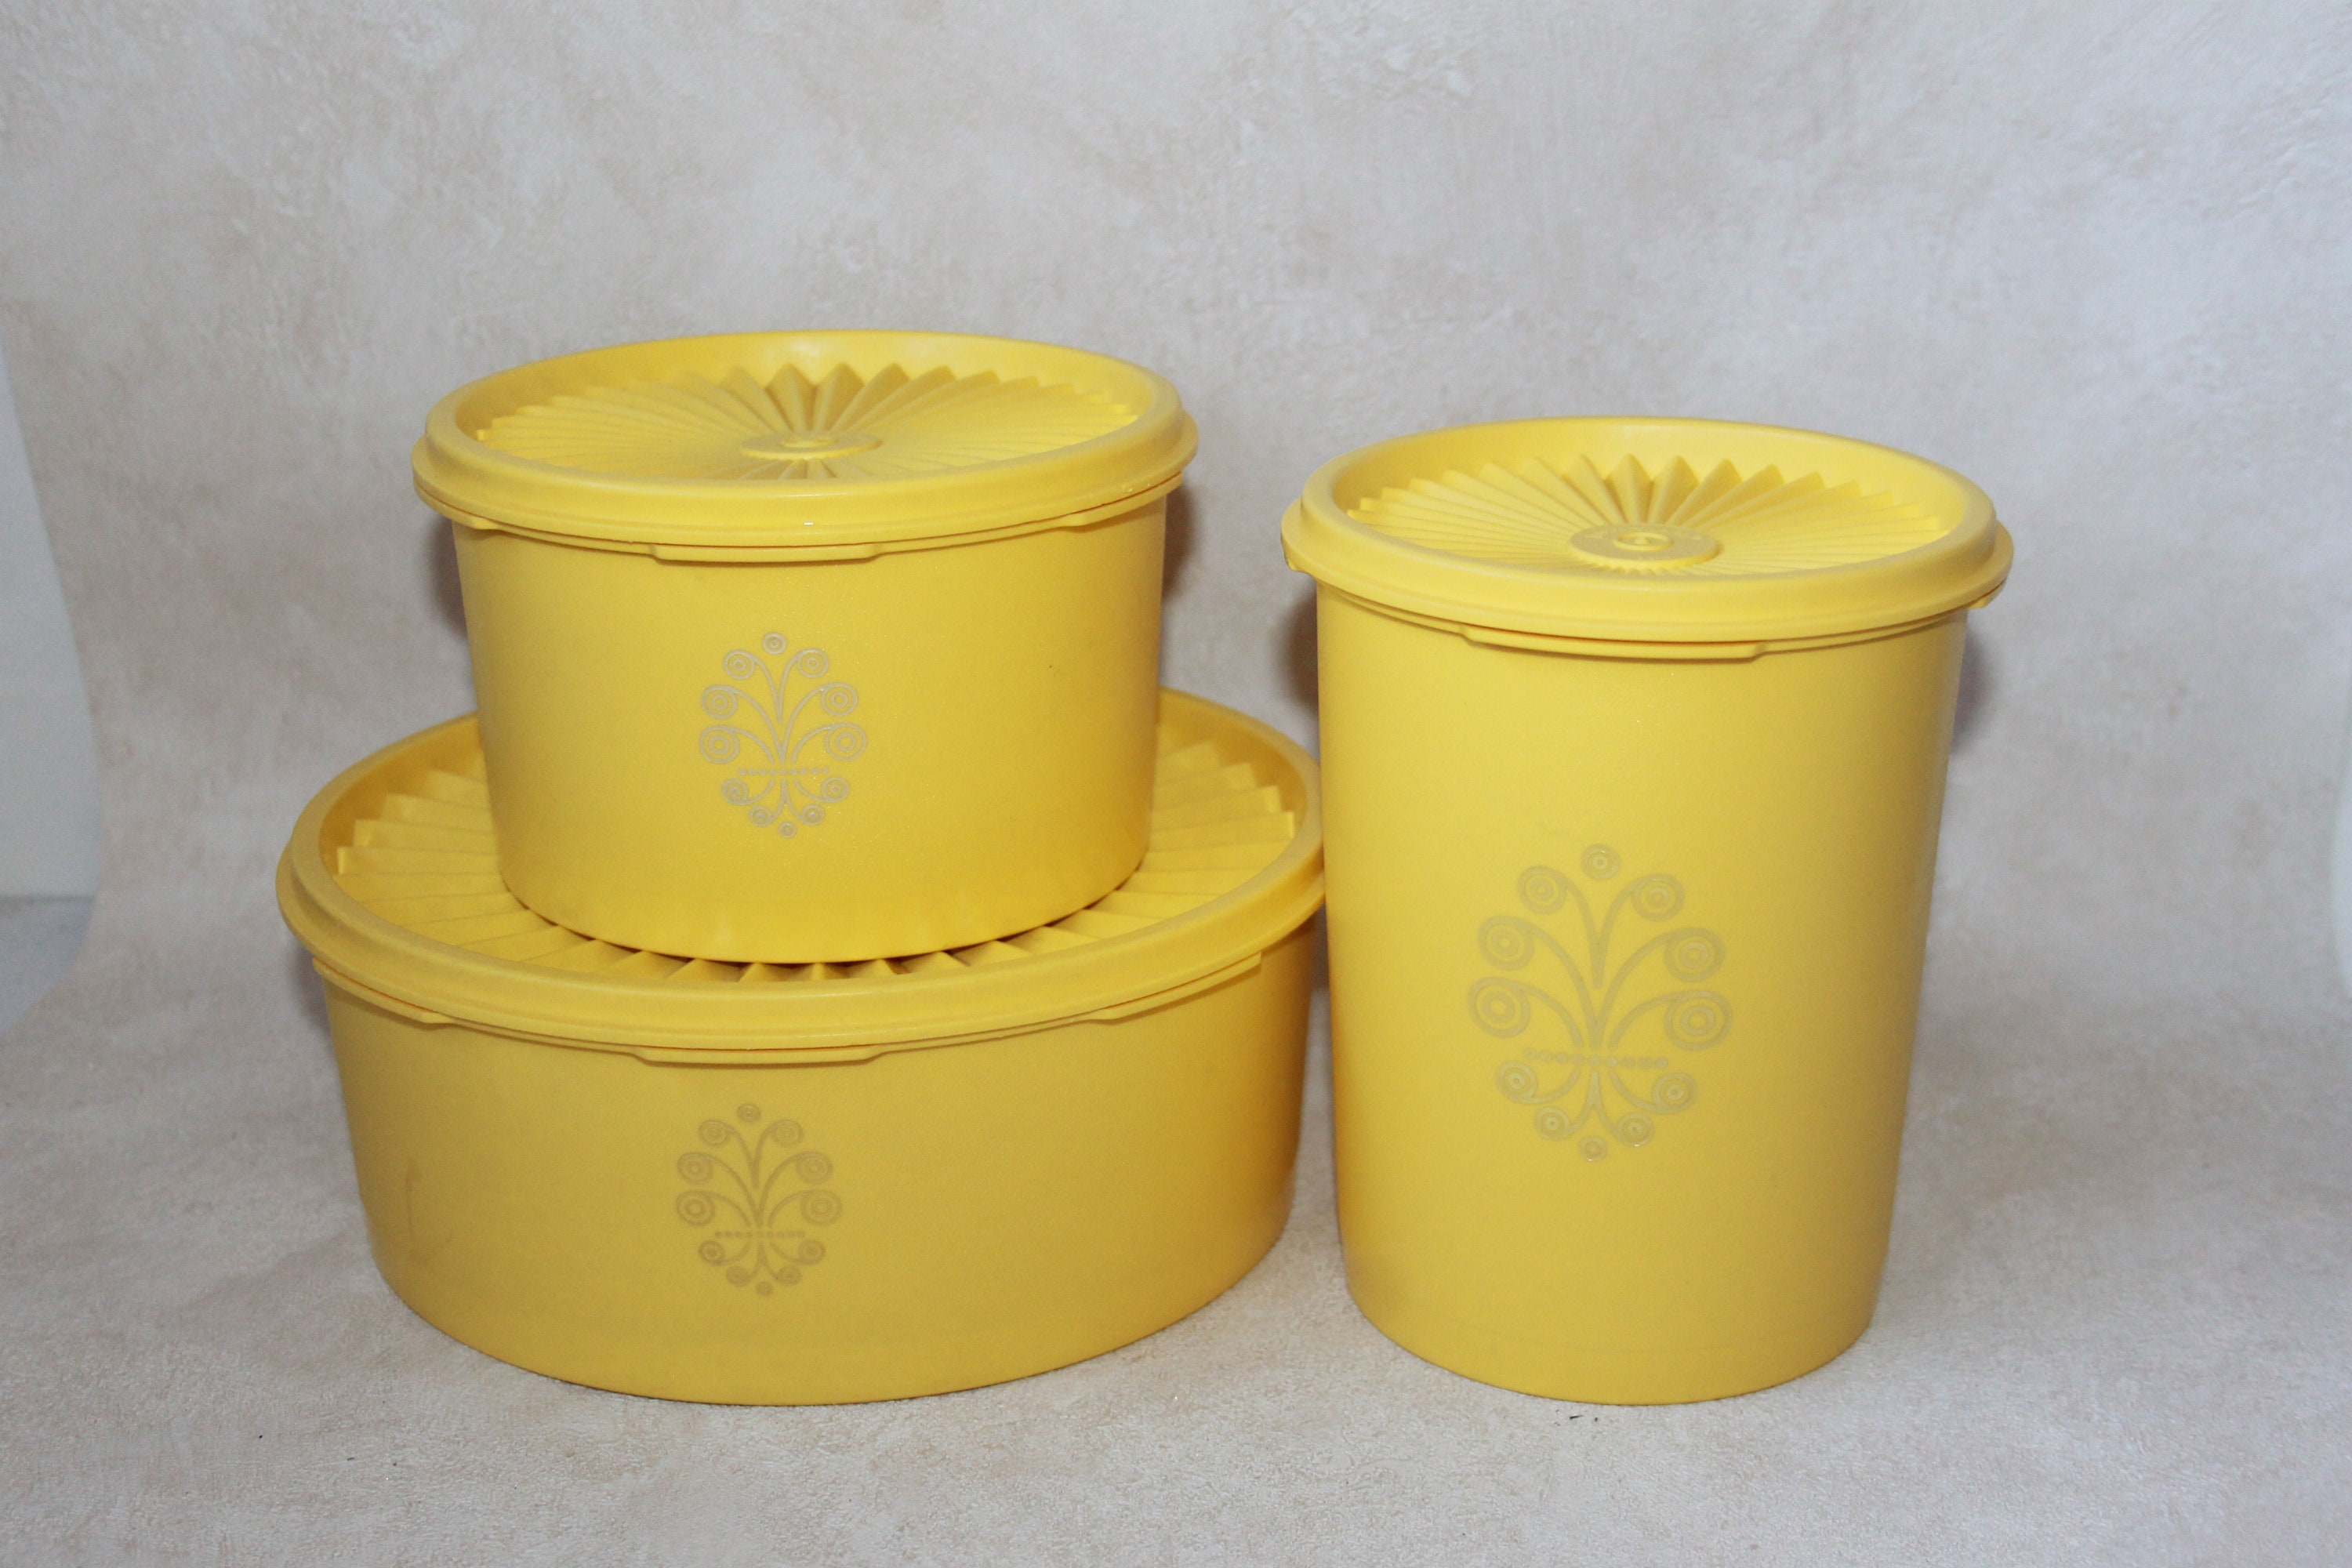 Vintage Tupperware Yellow Canisters X 2 W Servalier Lids, Small